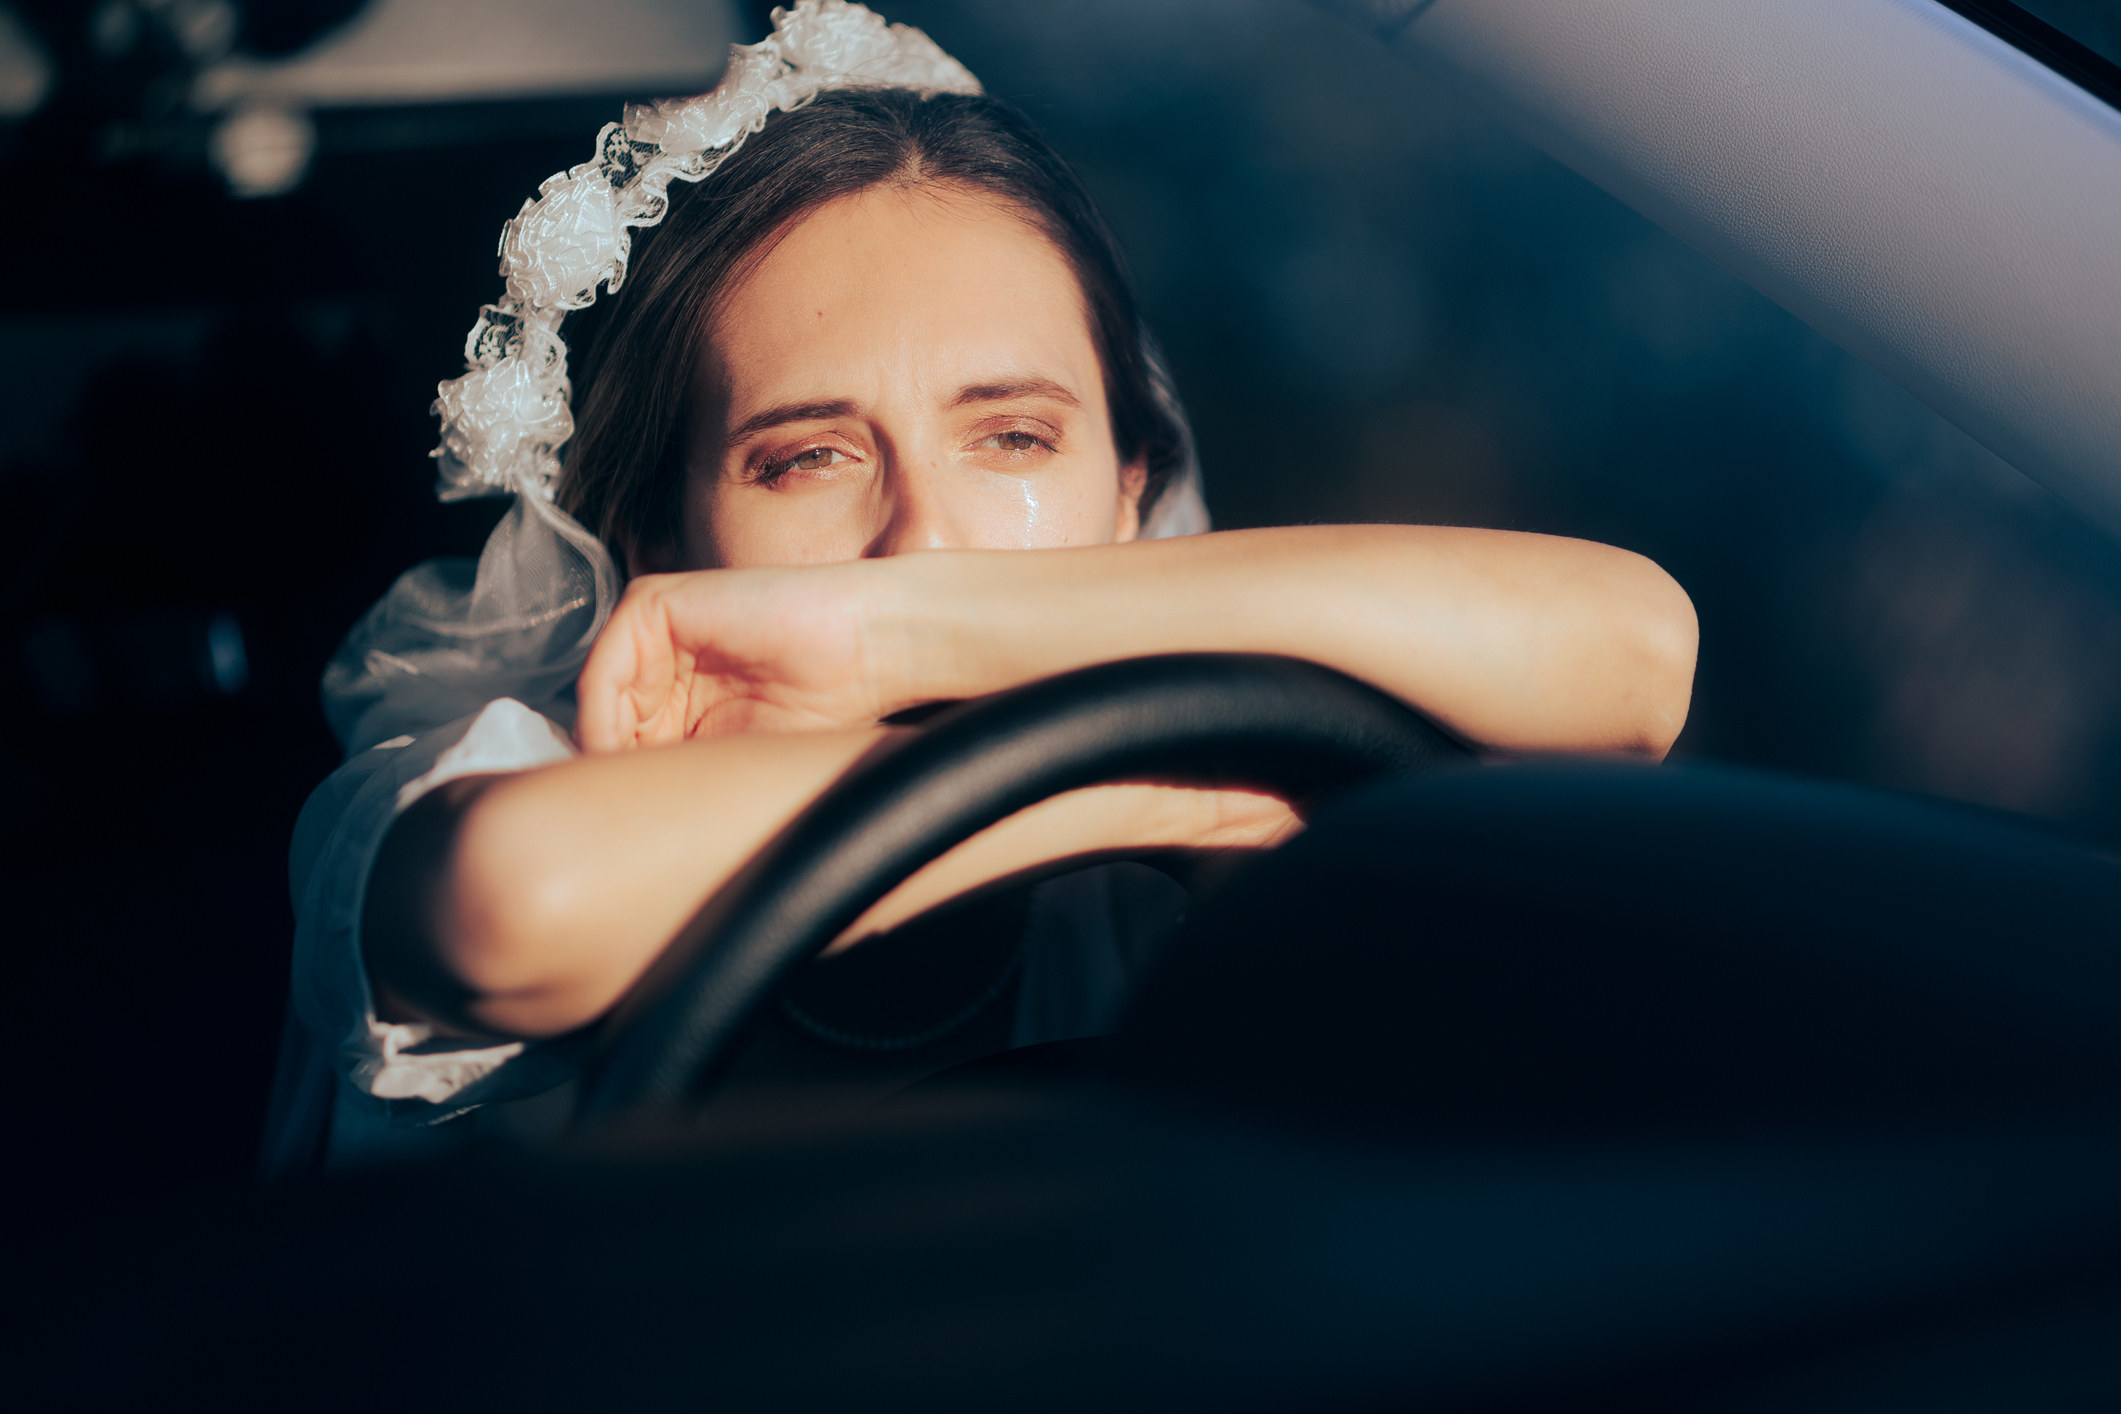 A bride crying in a car